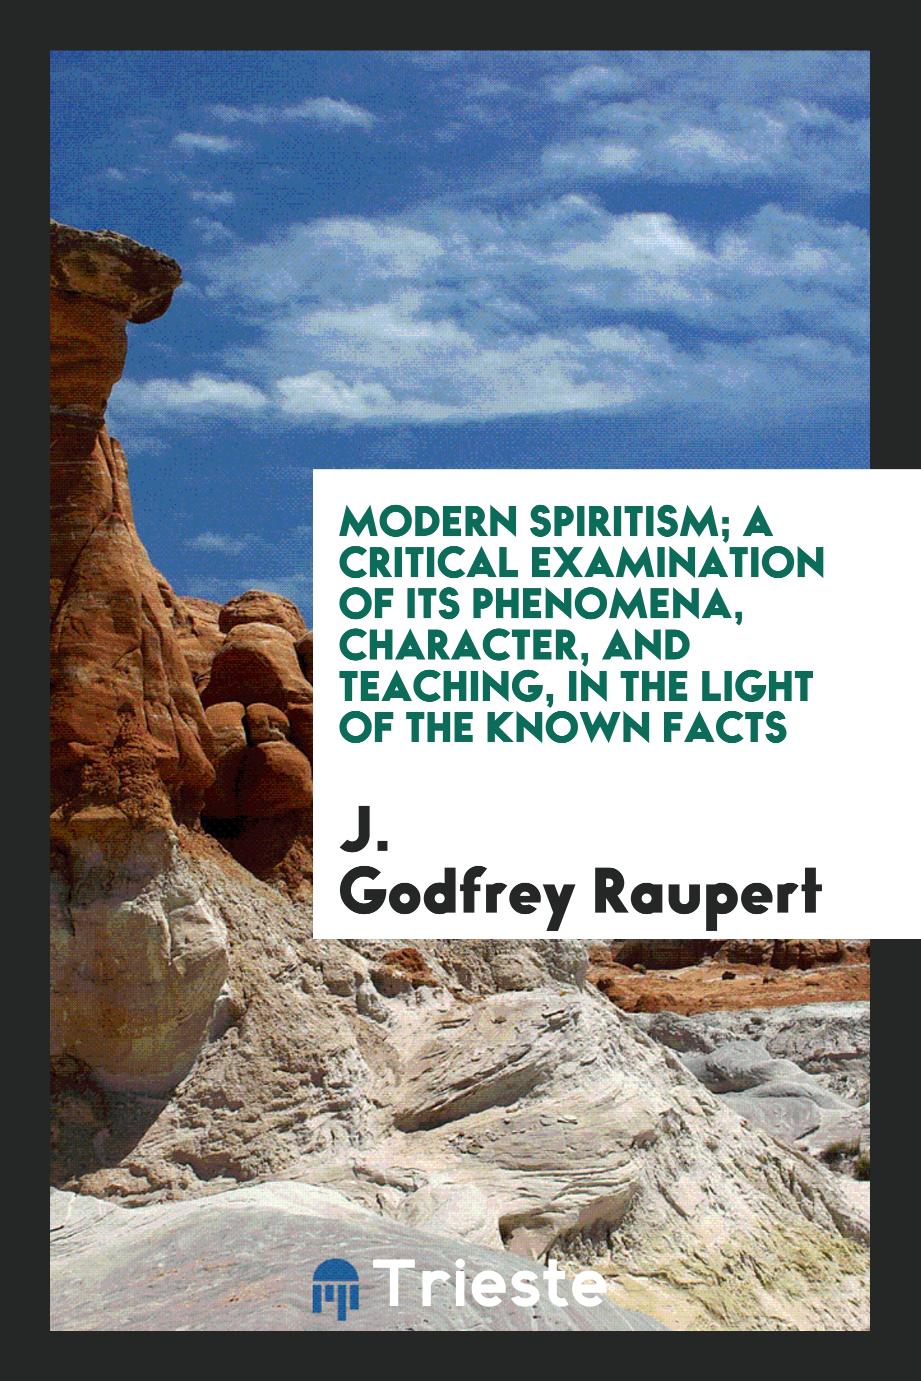 Modern spiritism; a critical examination of its phenomena, character, and teaching, in the light of the known facts